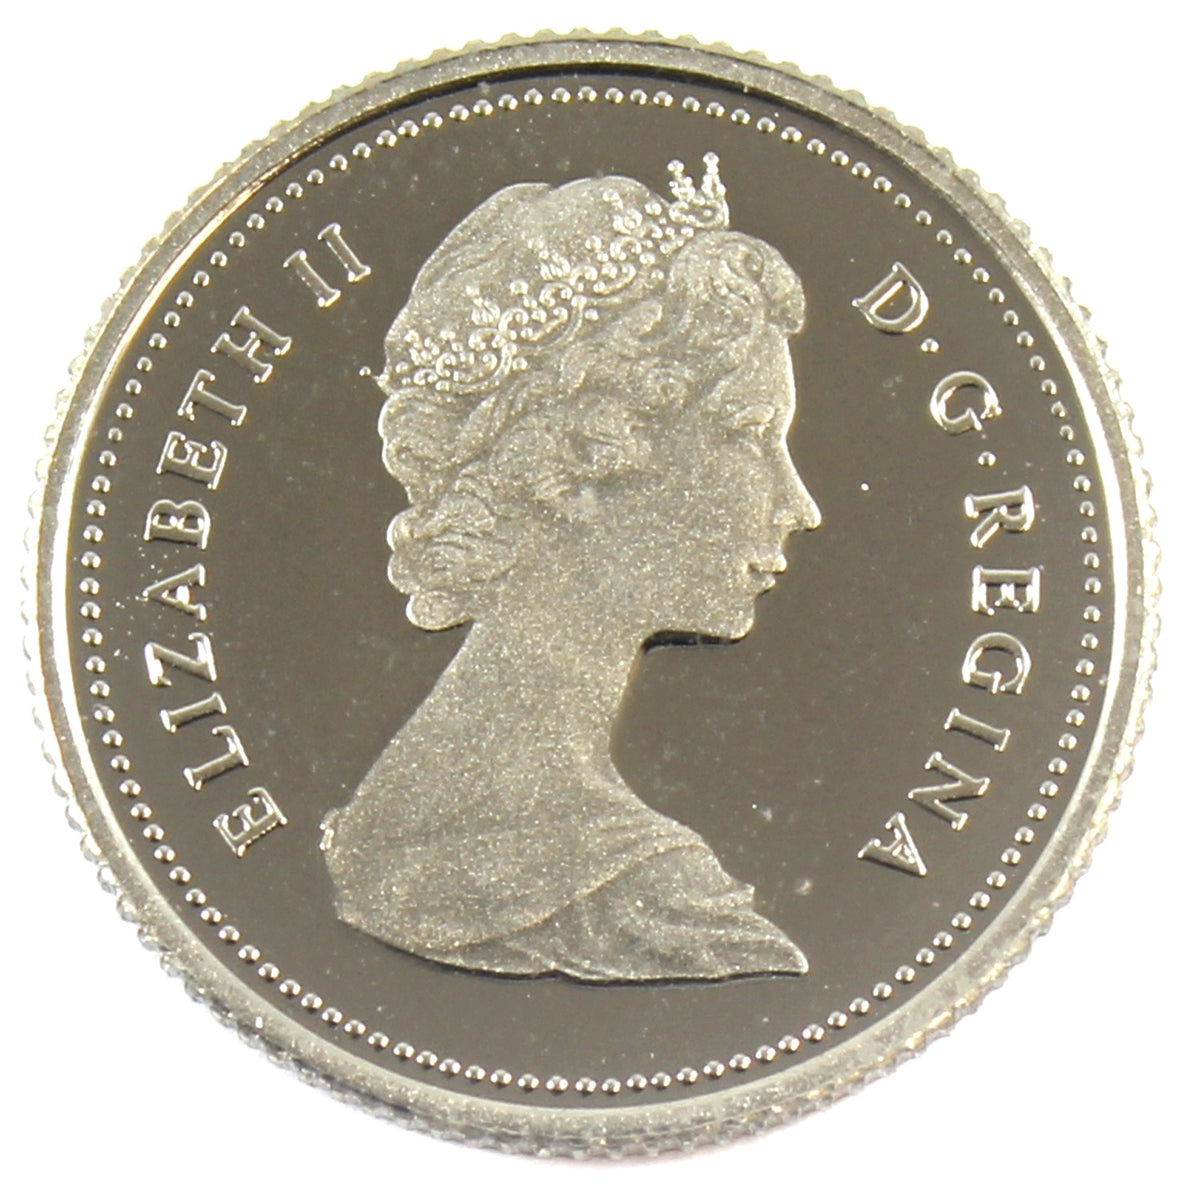 1983 Canada 10-cent Proof